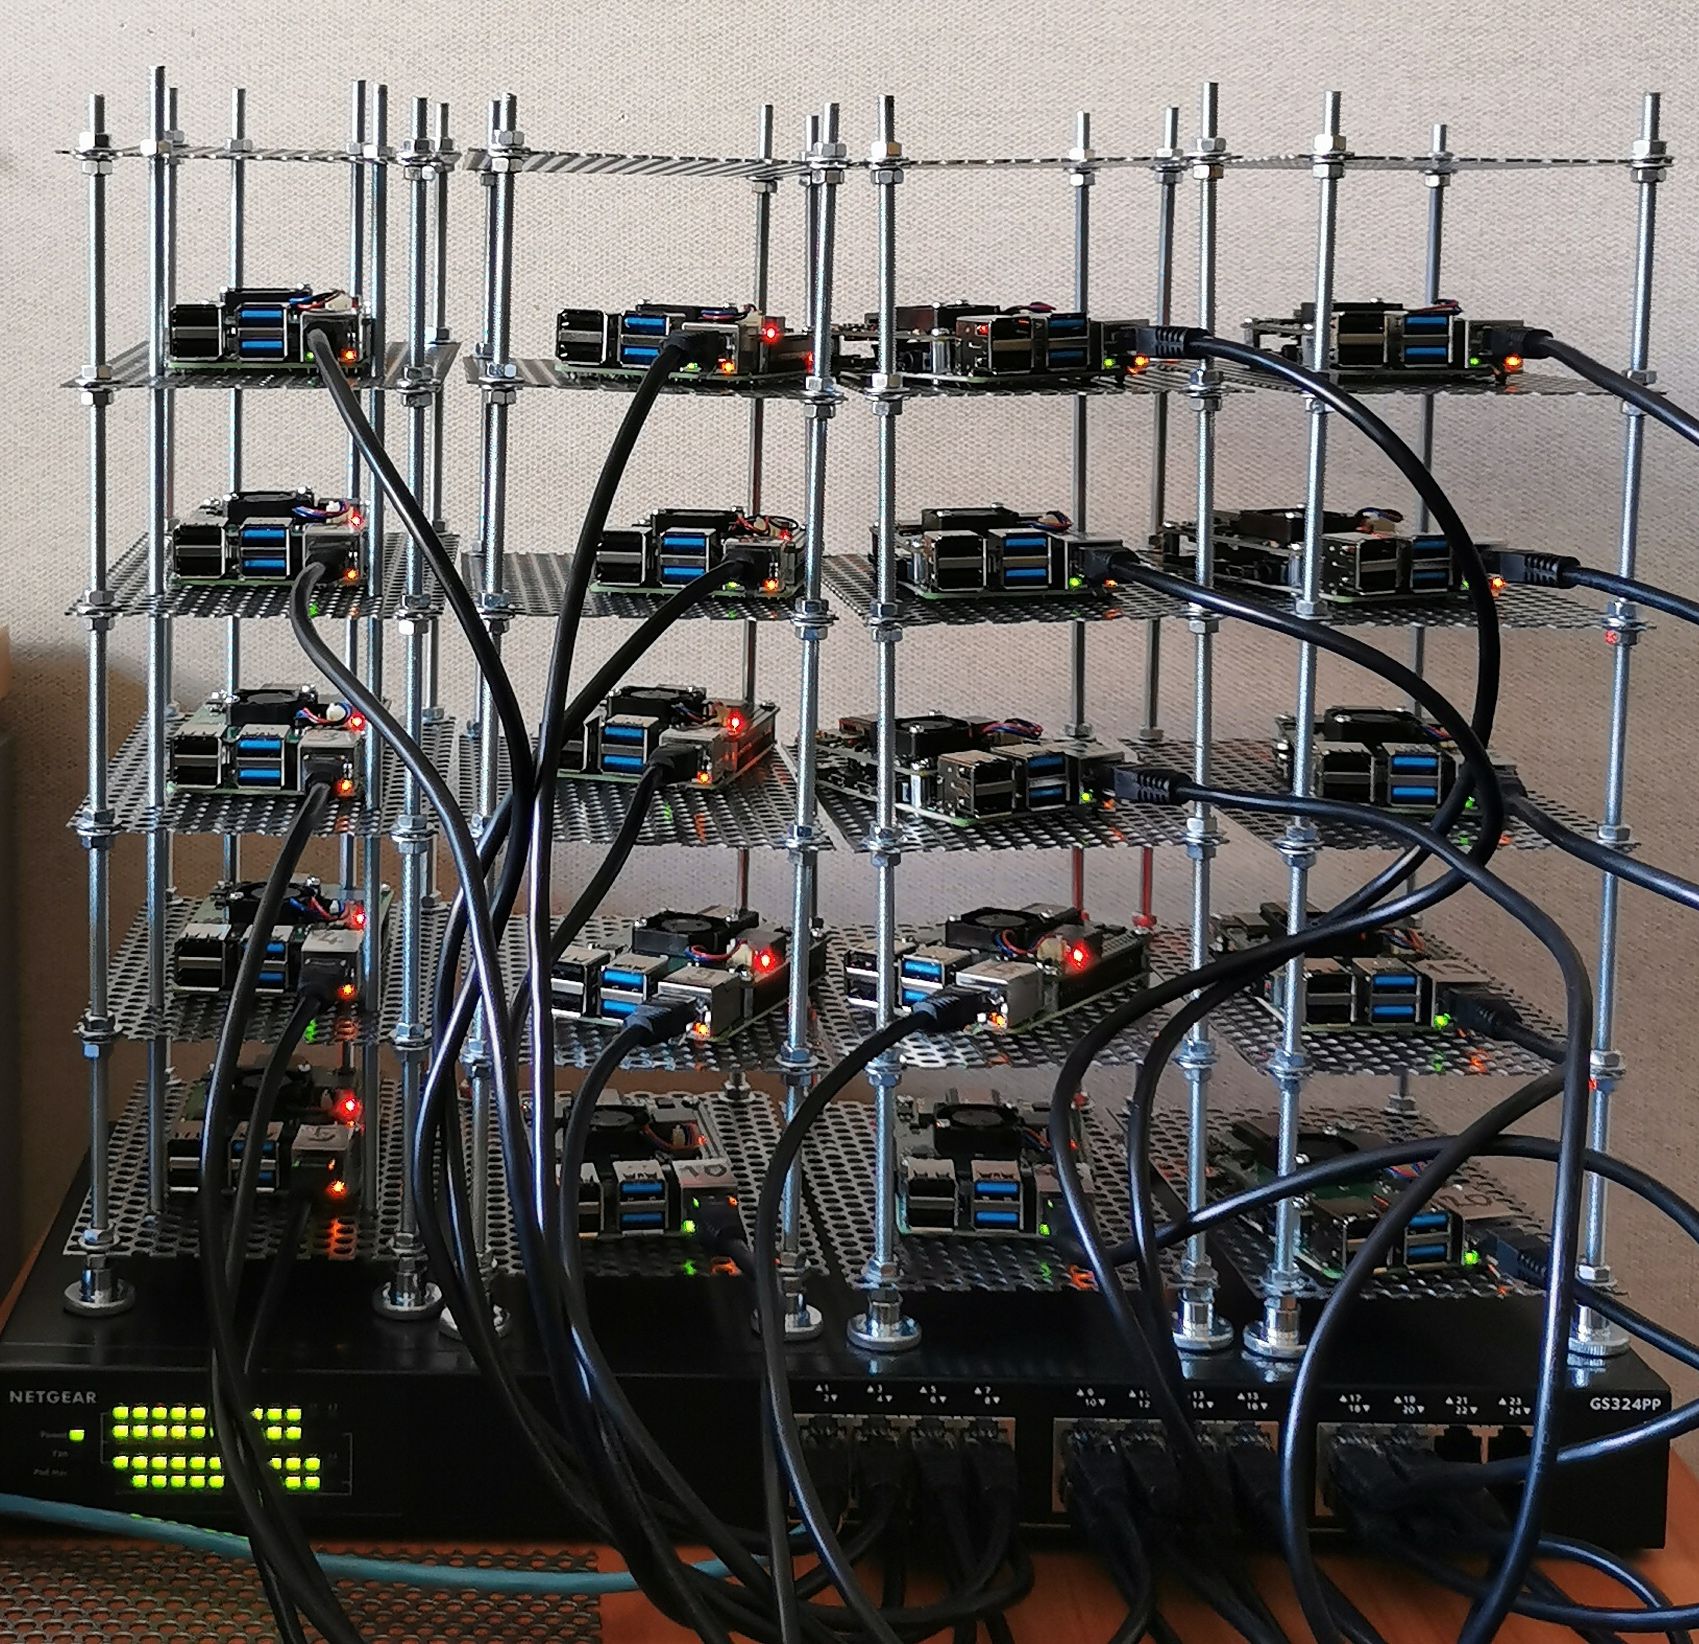 Our Raspberry Pi cluster